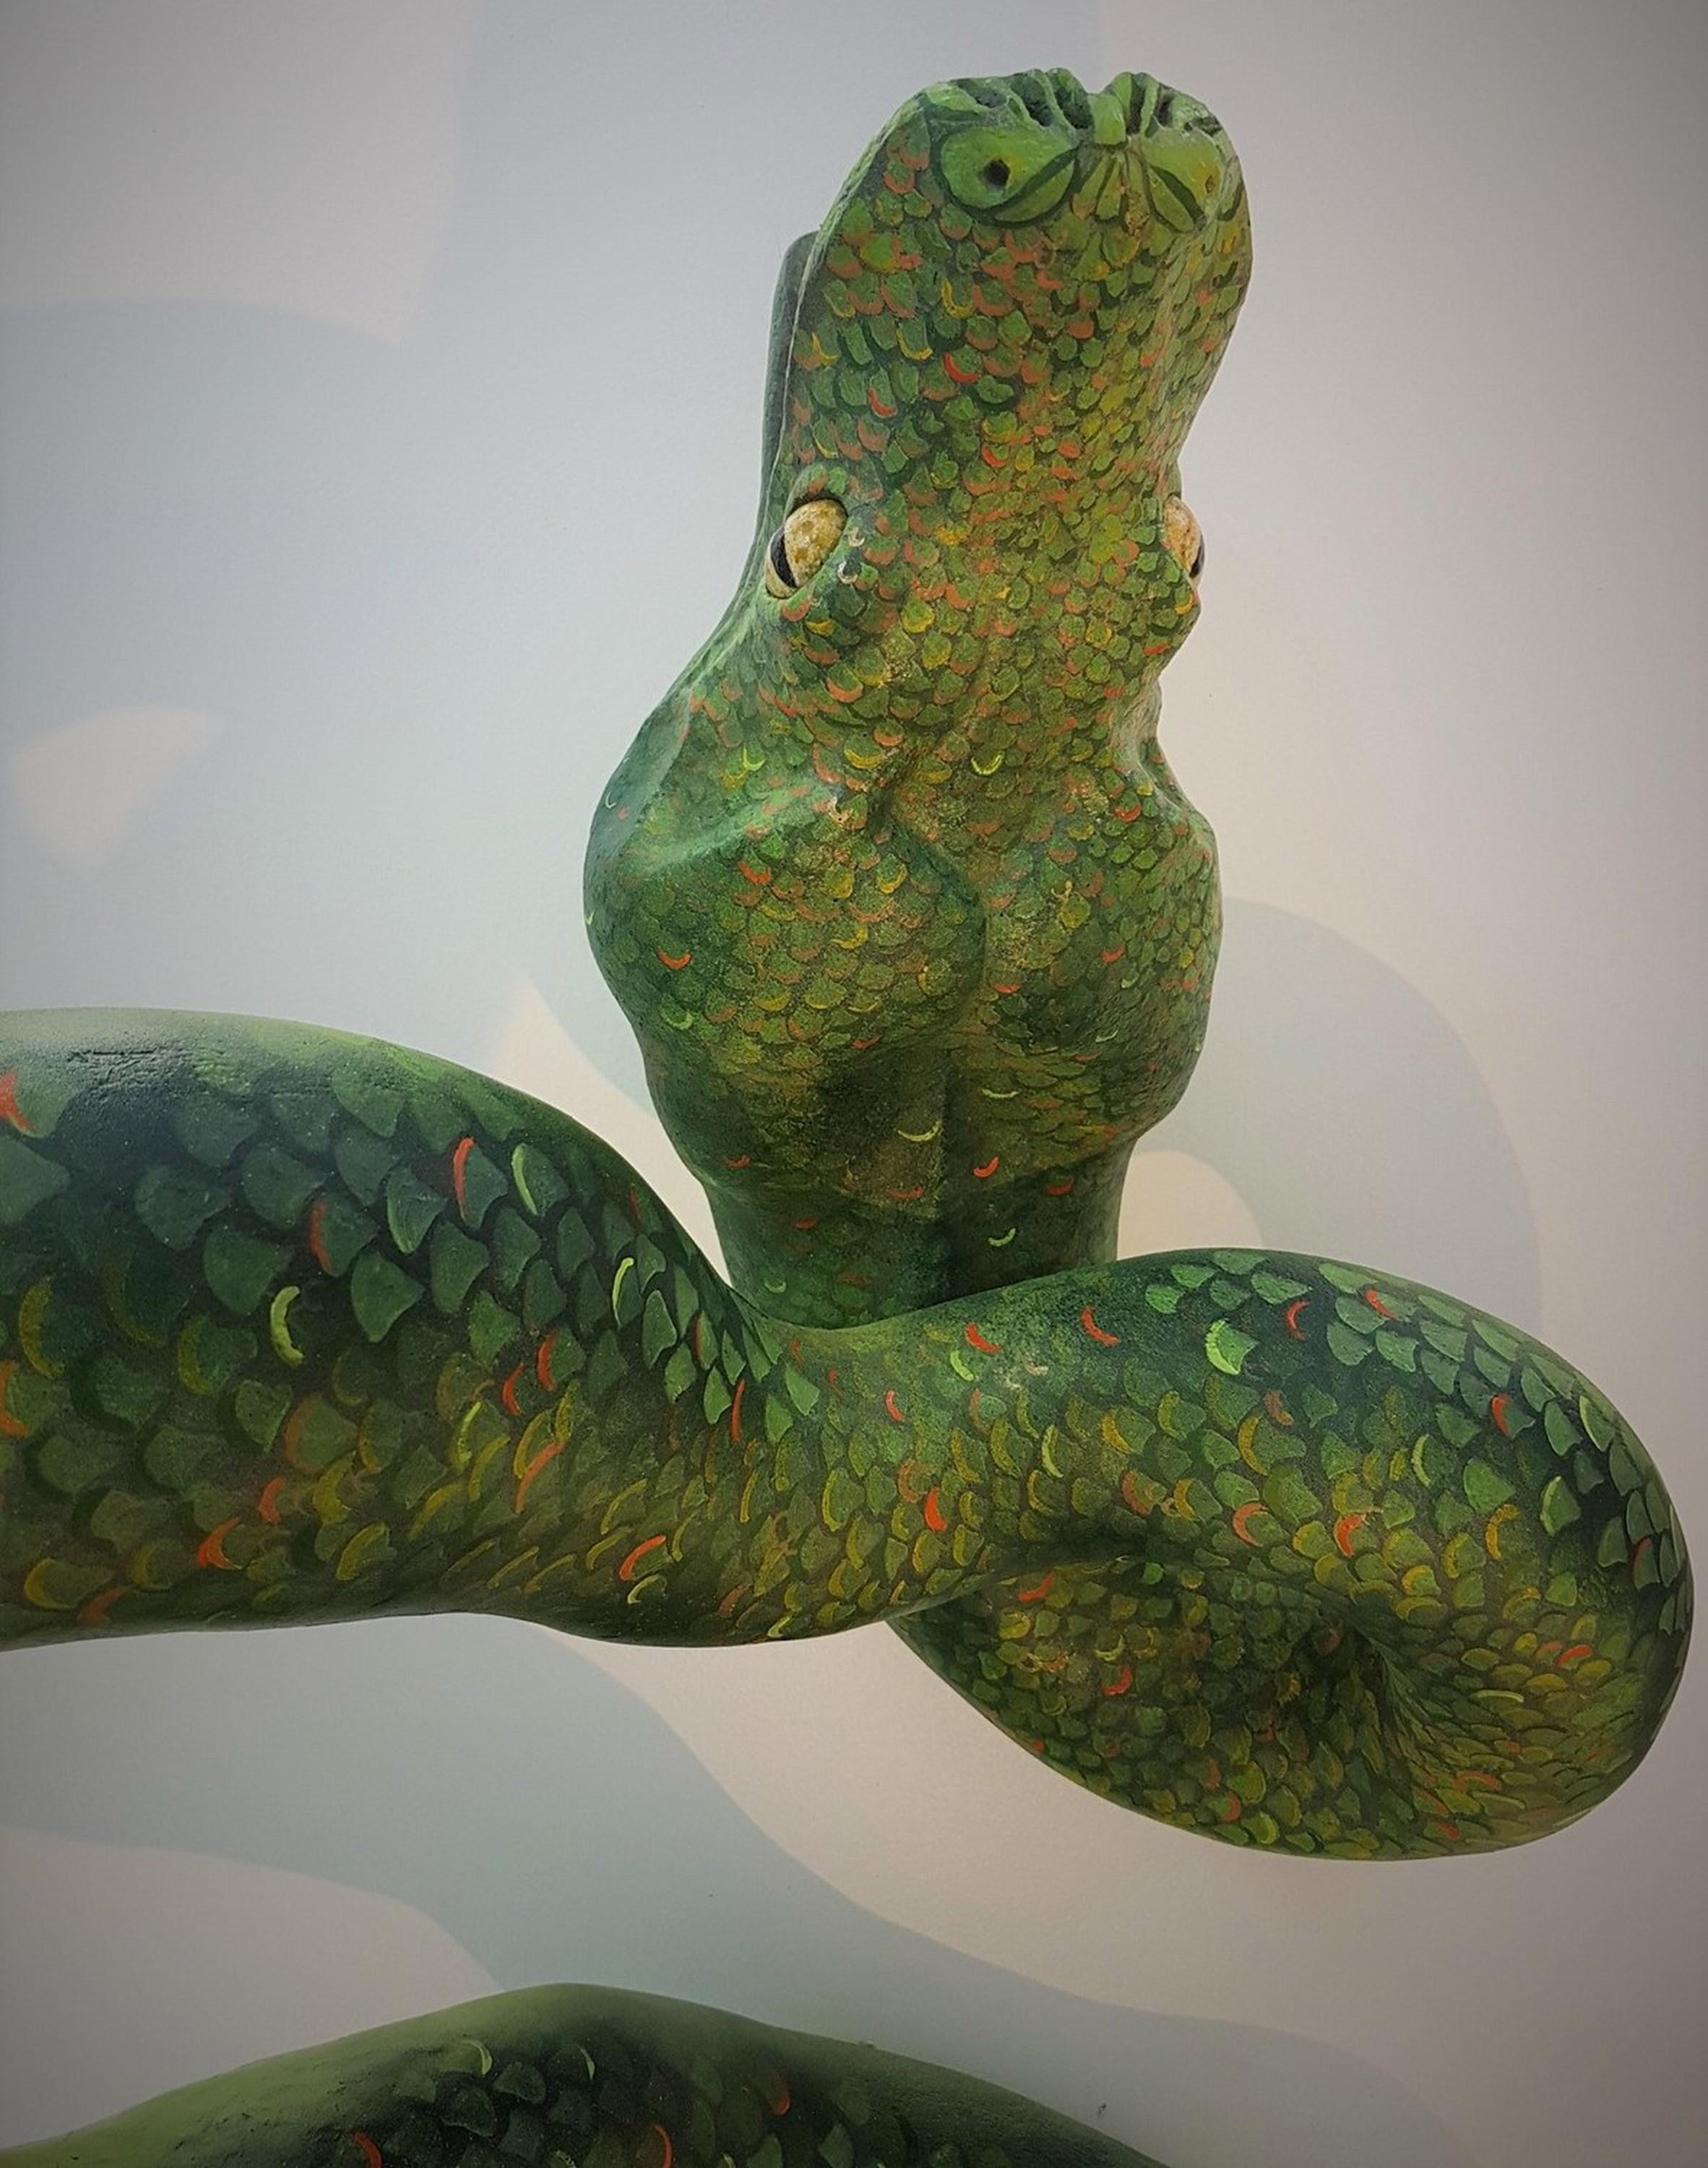 Ross Redmon
Title: Serpent
Ceramic, Post Fire Surfaces 
Year: 2014
Size: 84 x 26 x 19 inches
Signed
COA provided

Ross Redmon is a Kansas City based artist, originally from Greer, South Carolina.  After completing his studies on a full scholarship